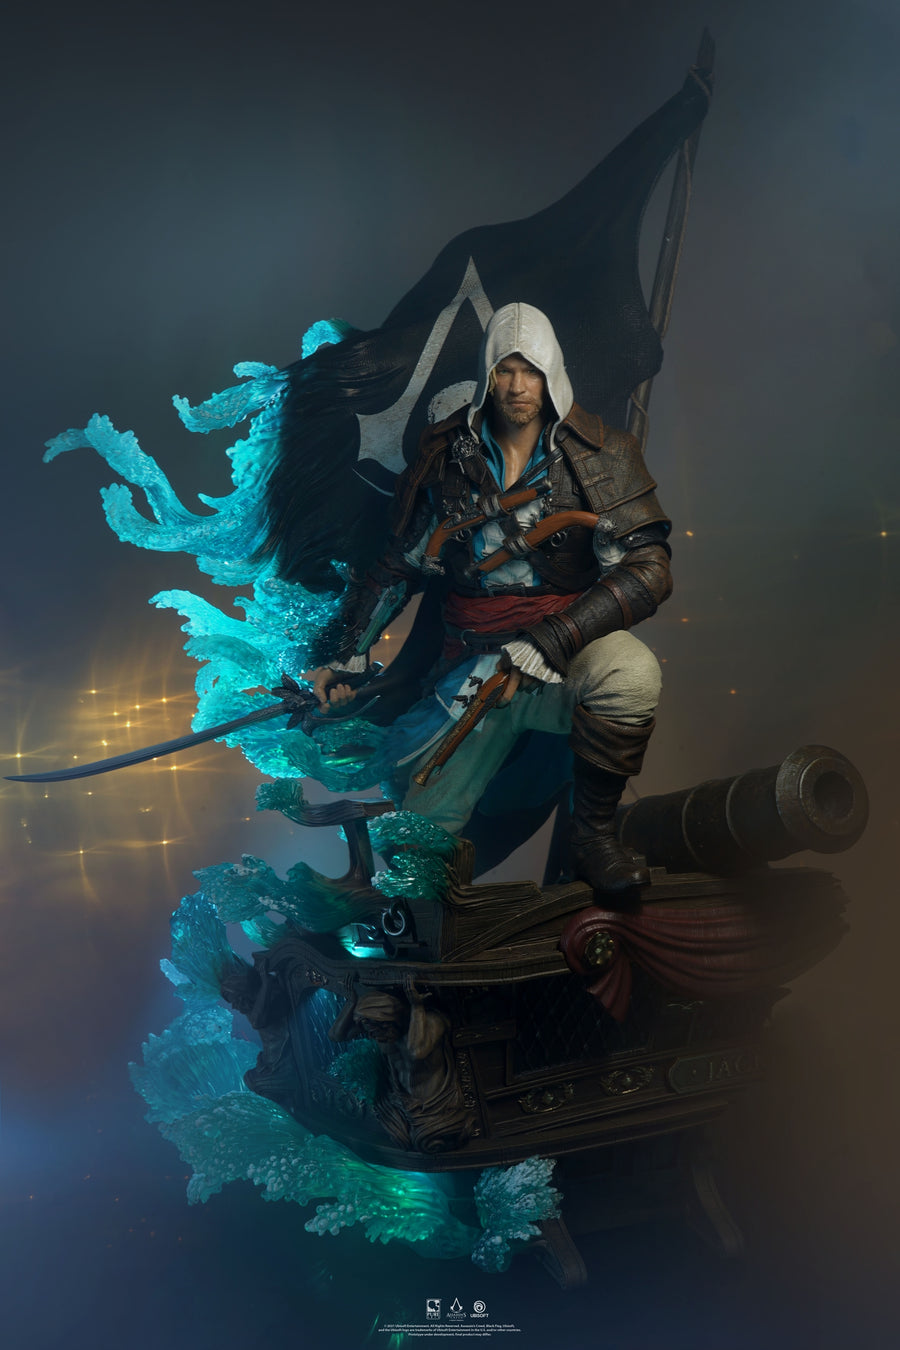 Assassin's Creed Access the Animus  Assassin's creed, Assassins creed art, Assassins  creed black flag